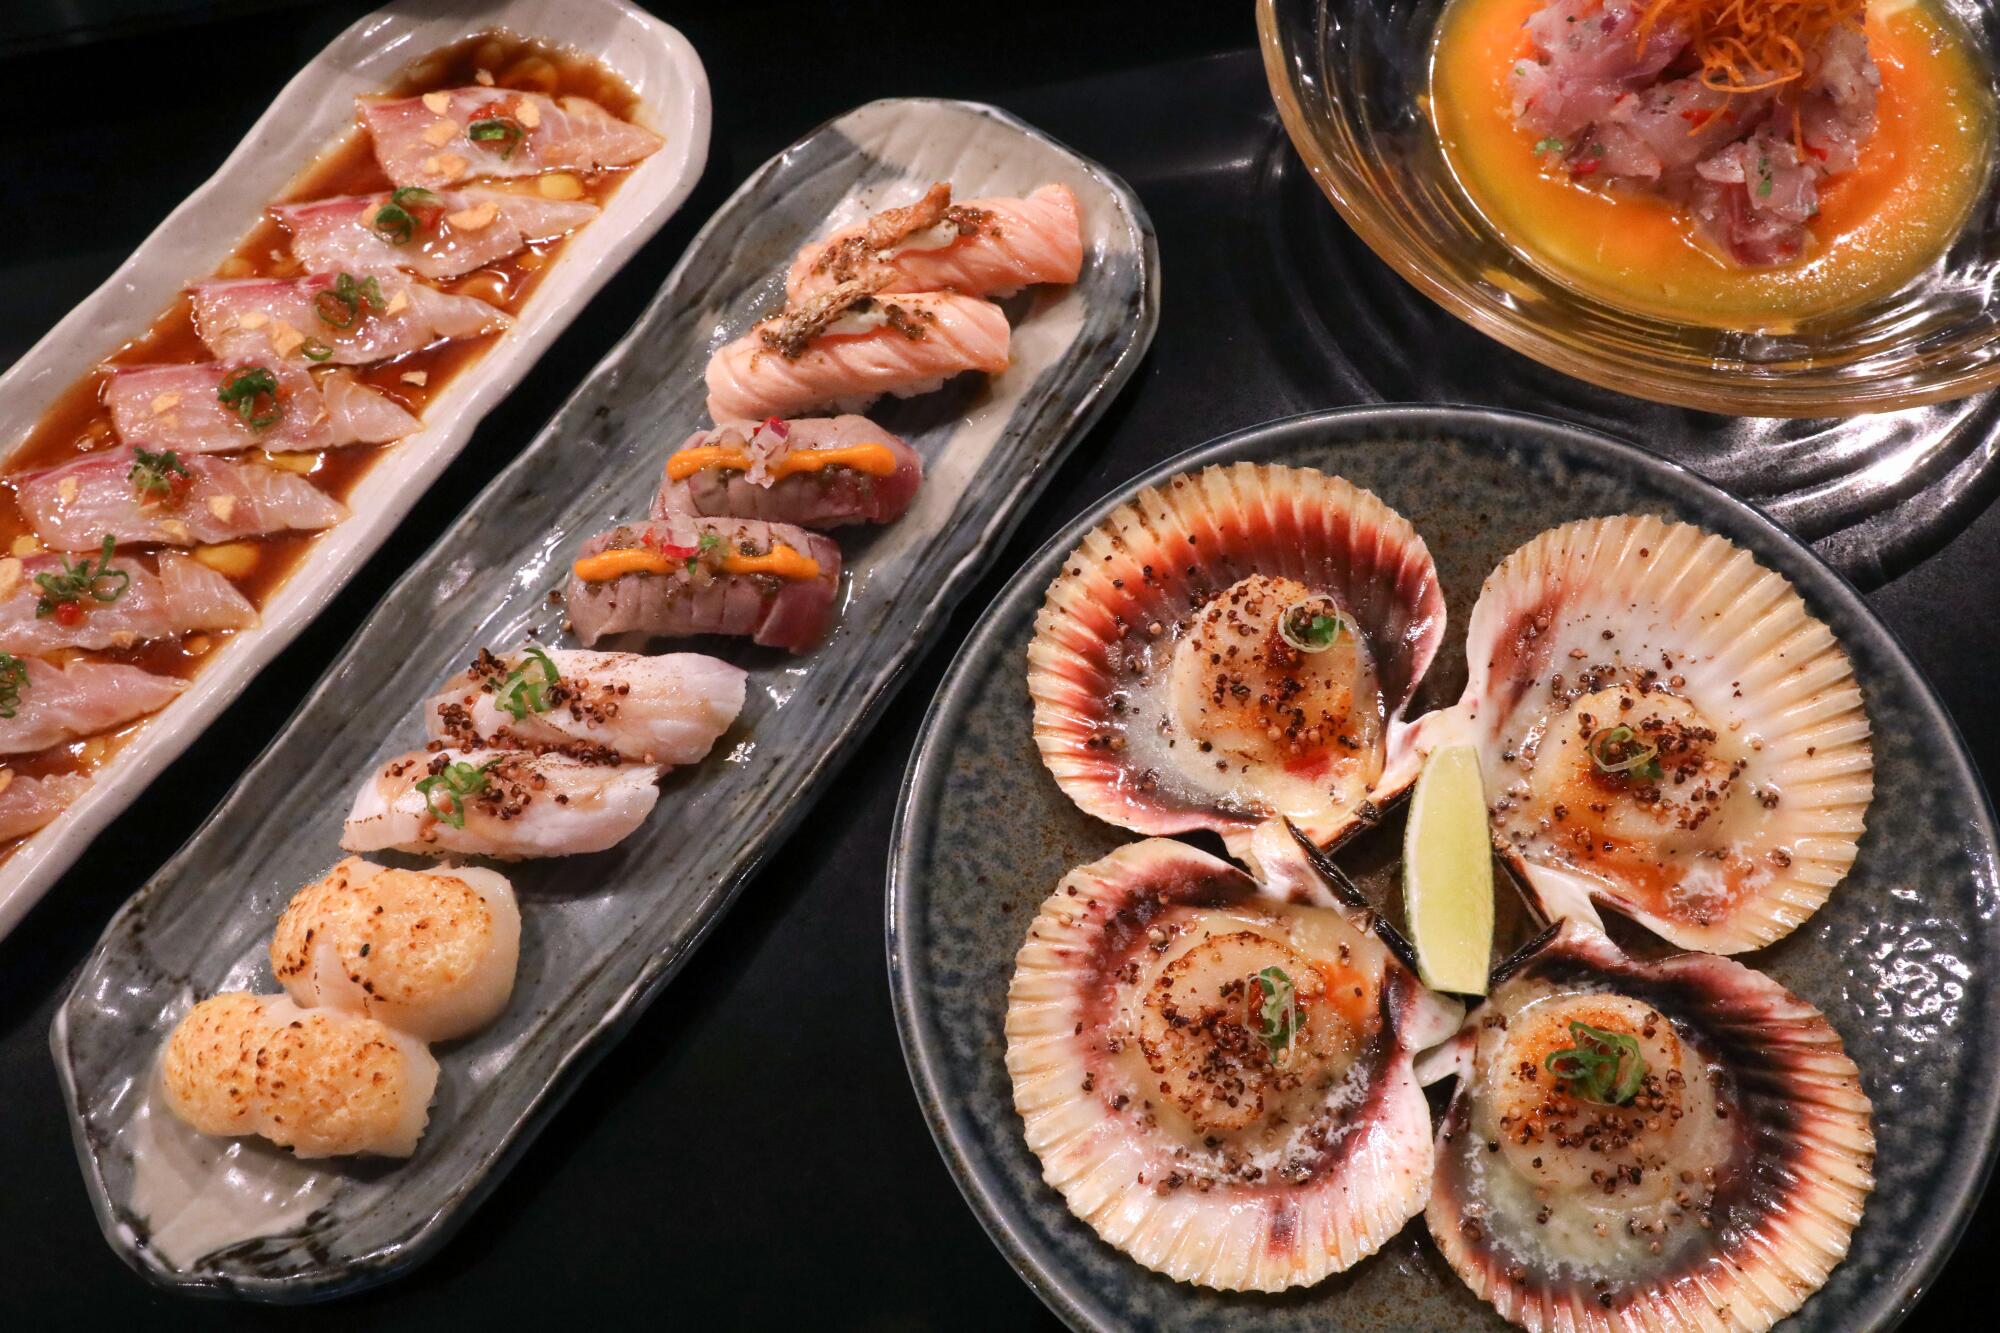 Four courses including sushi and open scallops.